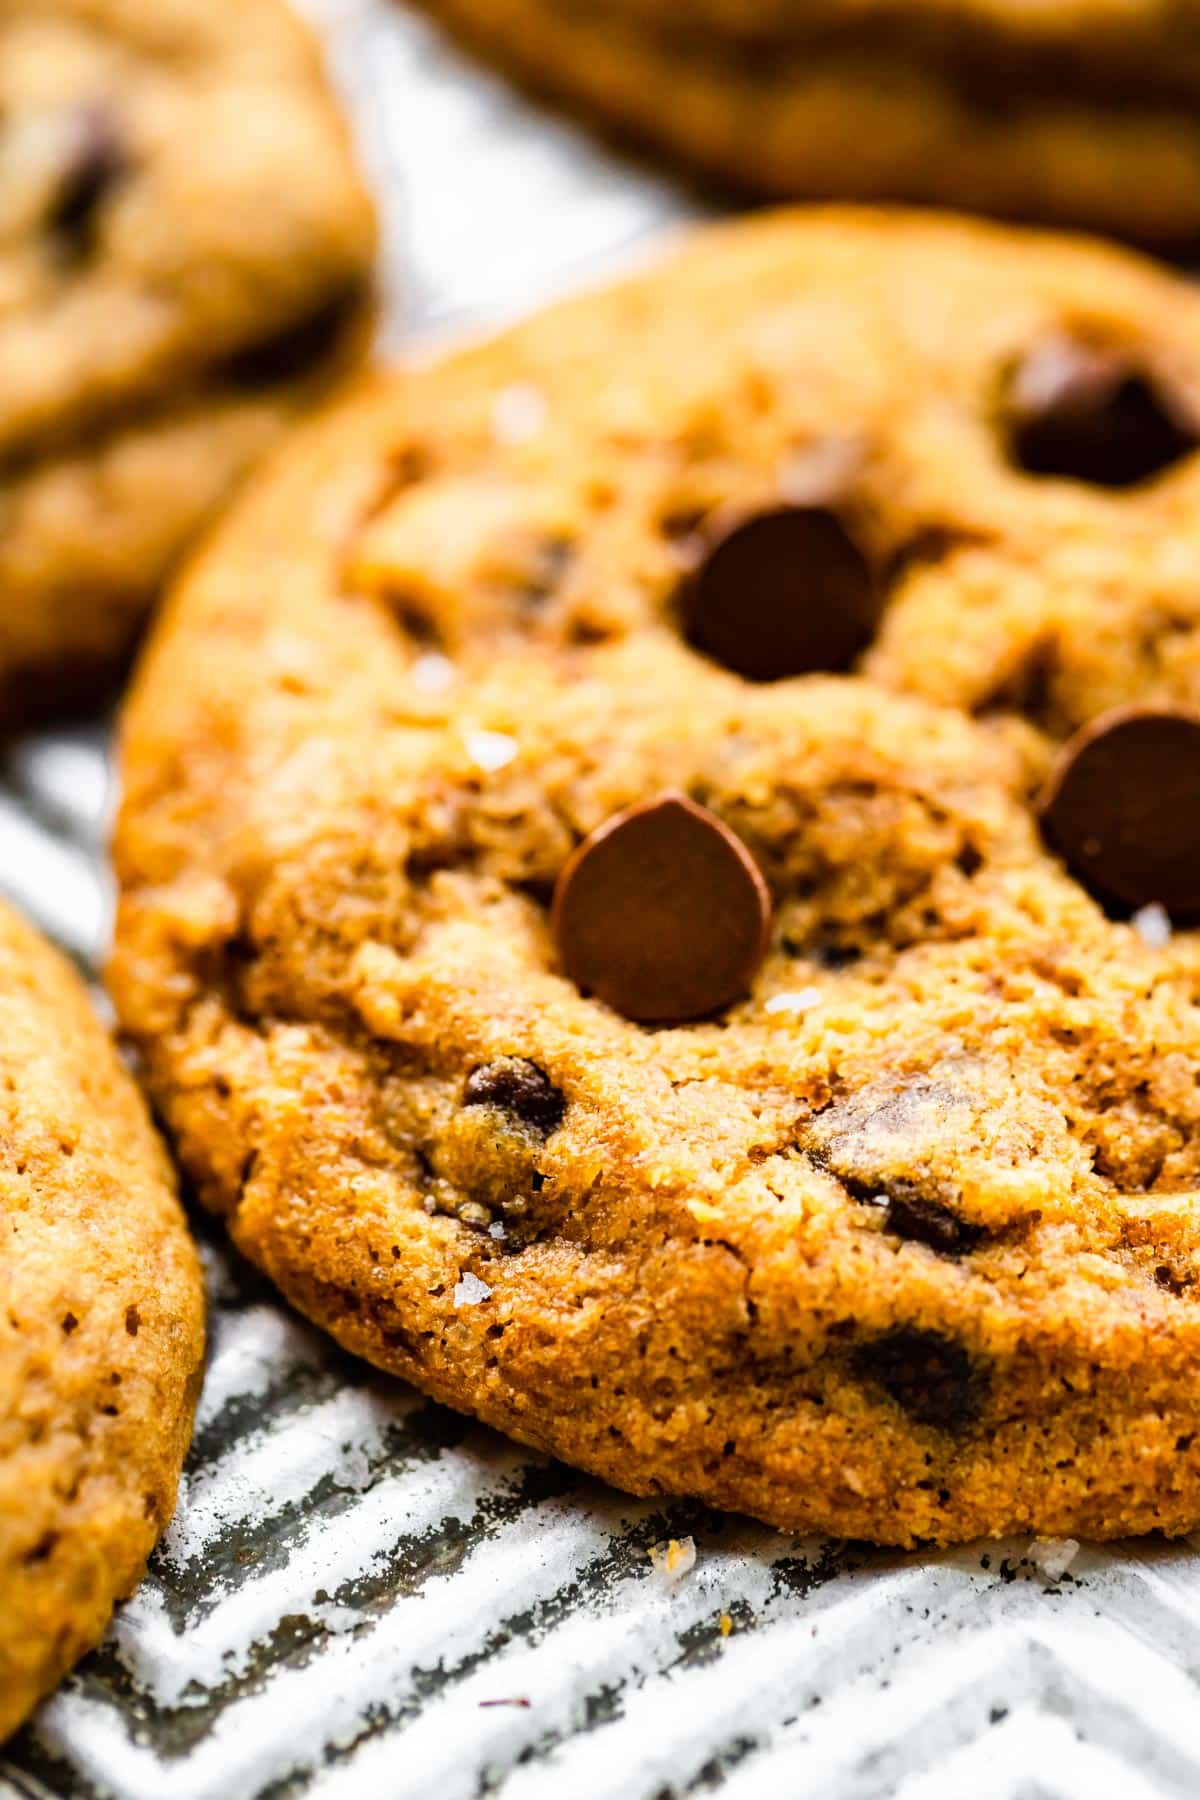 A close up of a gluten free chocolate chip cookie on a metal baking sheet.